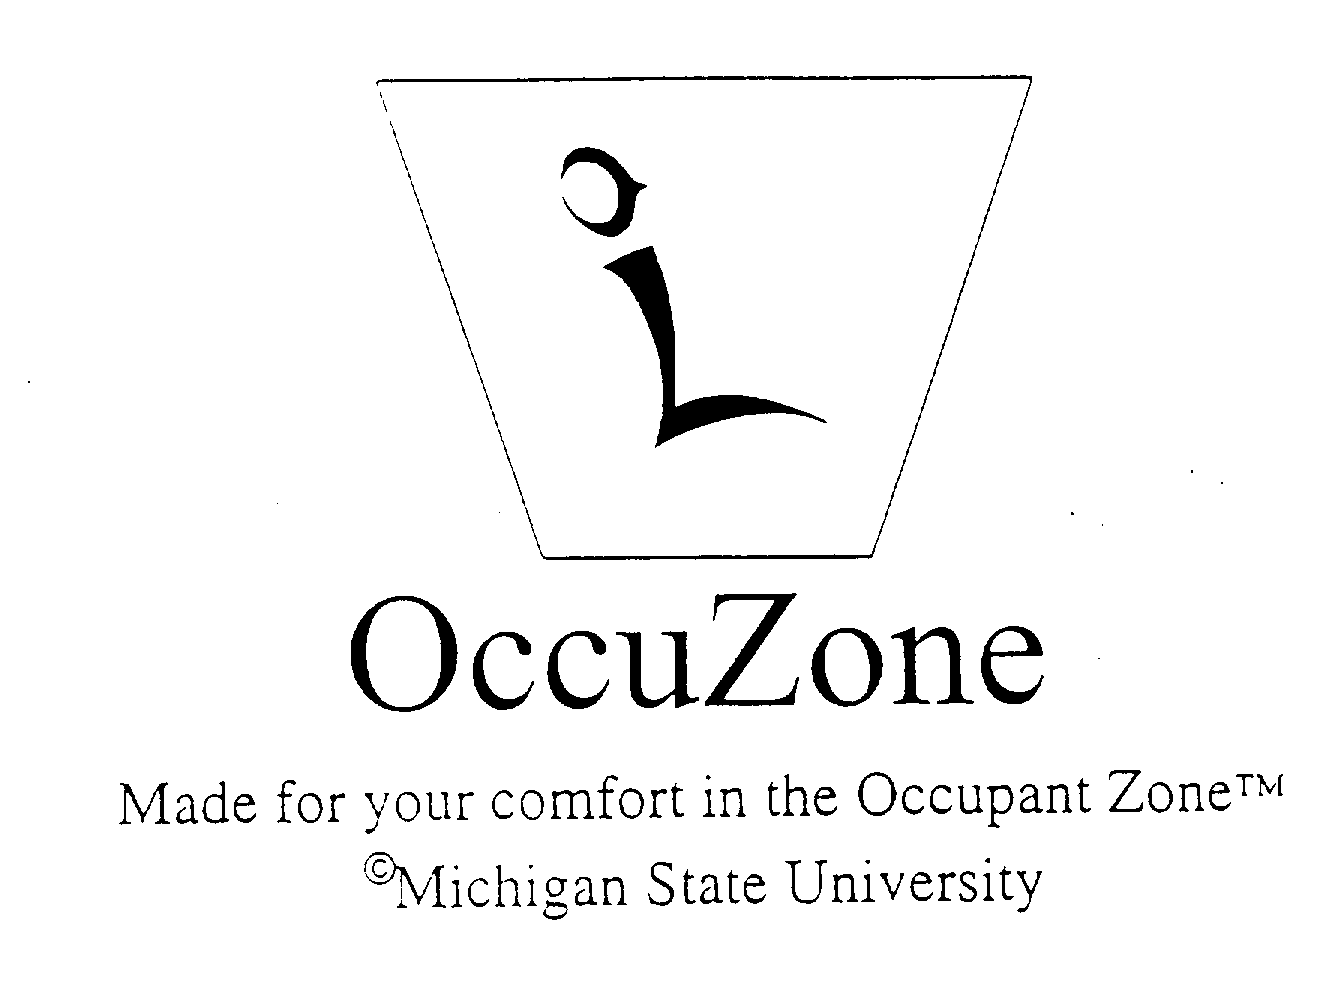  OCCUZONE MADE FOR YOUR COMFORT IN THE OCCUPANT ZONE MICHIGAN STATE UNIVERSITY